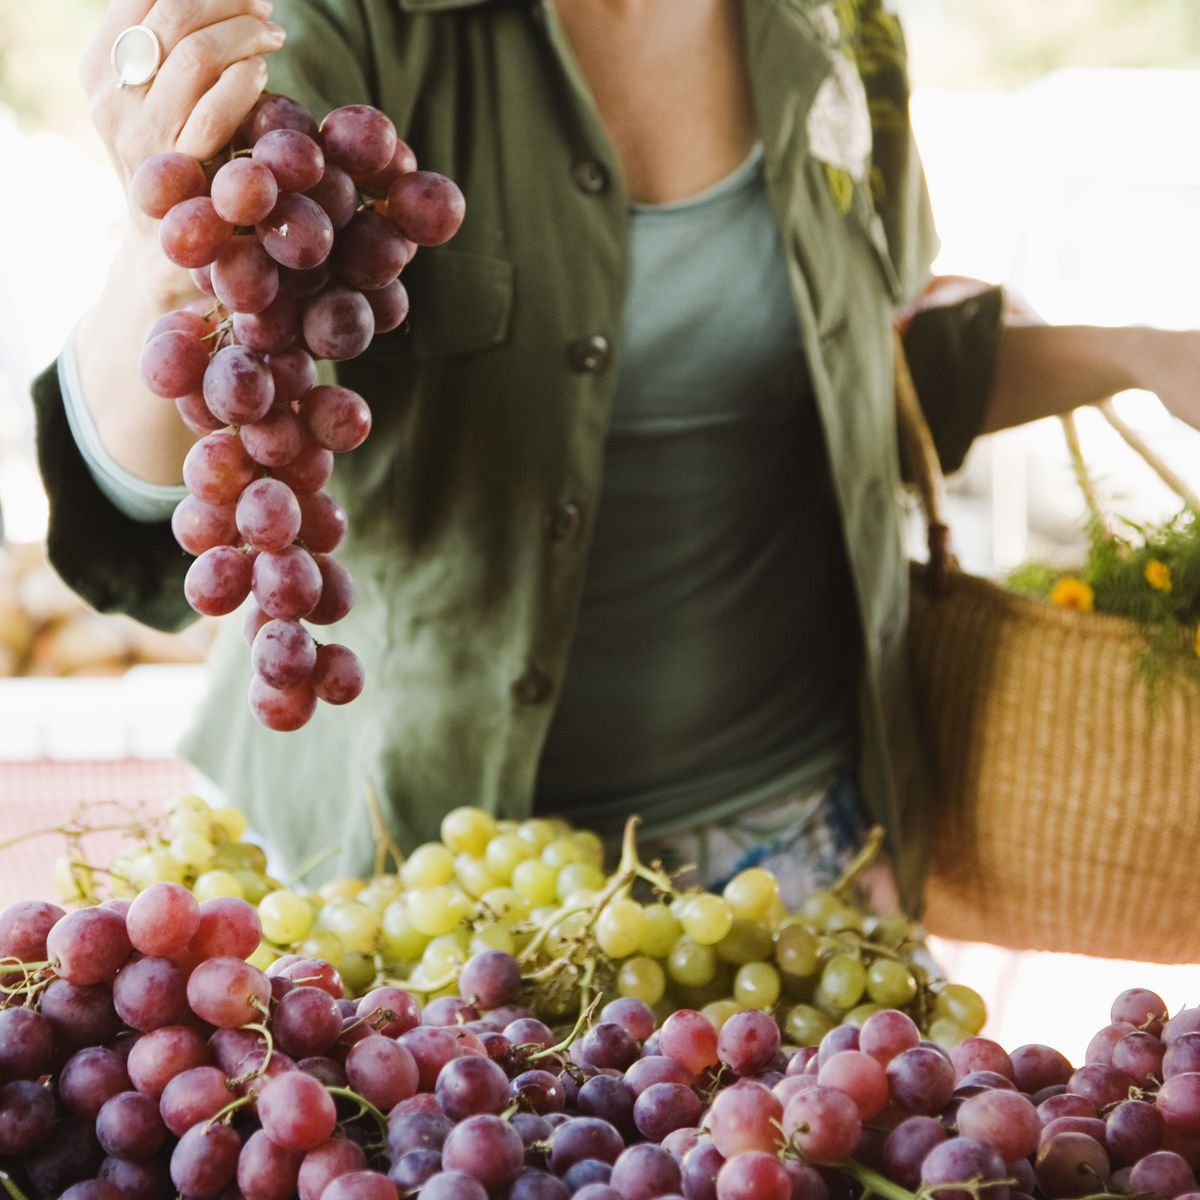 Are Grapes Good for You? – Health Benefits of Grapes